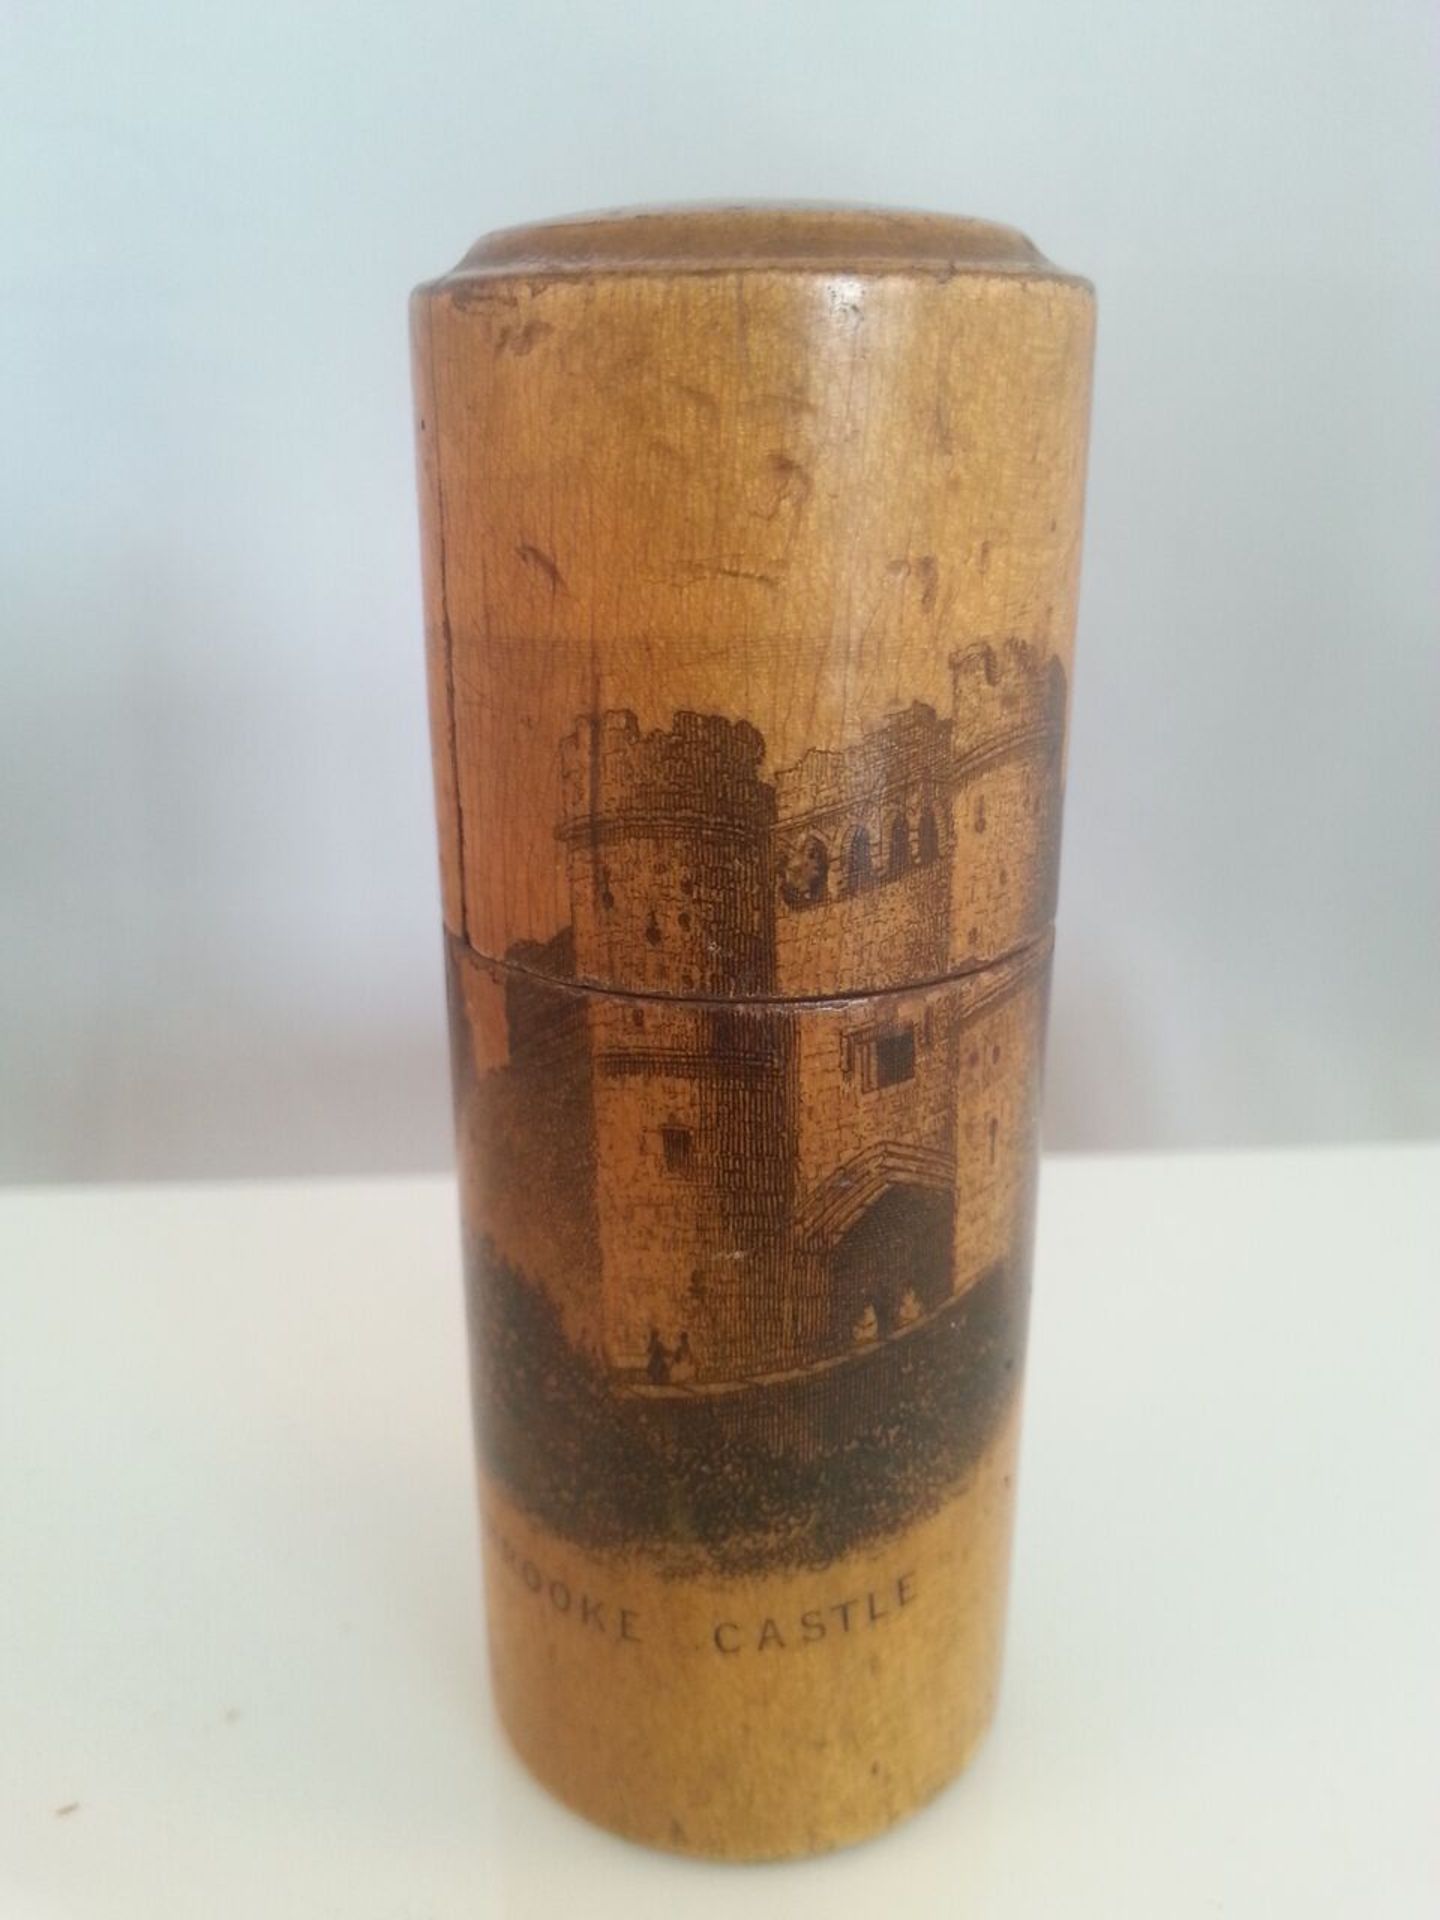 Mauchline Ware Toothpick holder - Carisbrooke Castle Low cost delivery available on all items.